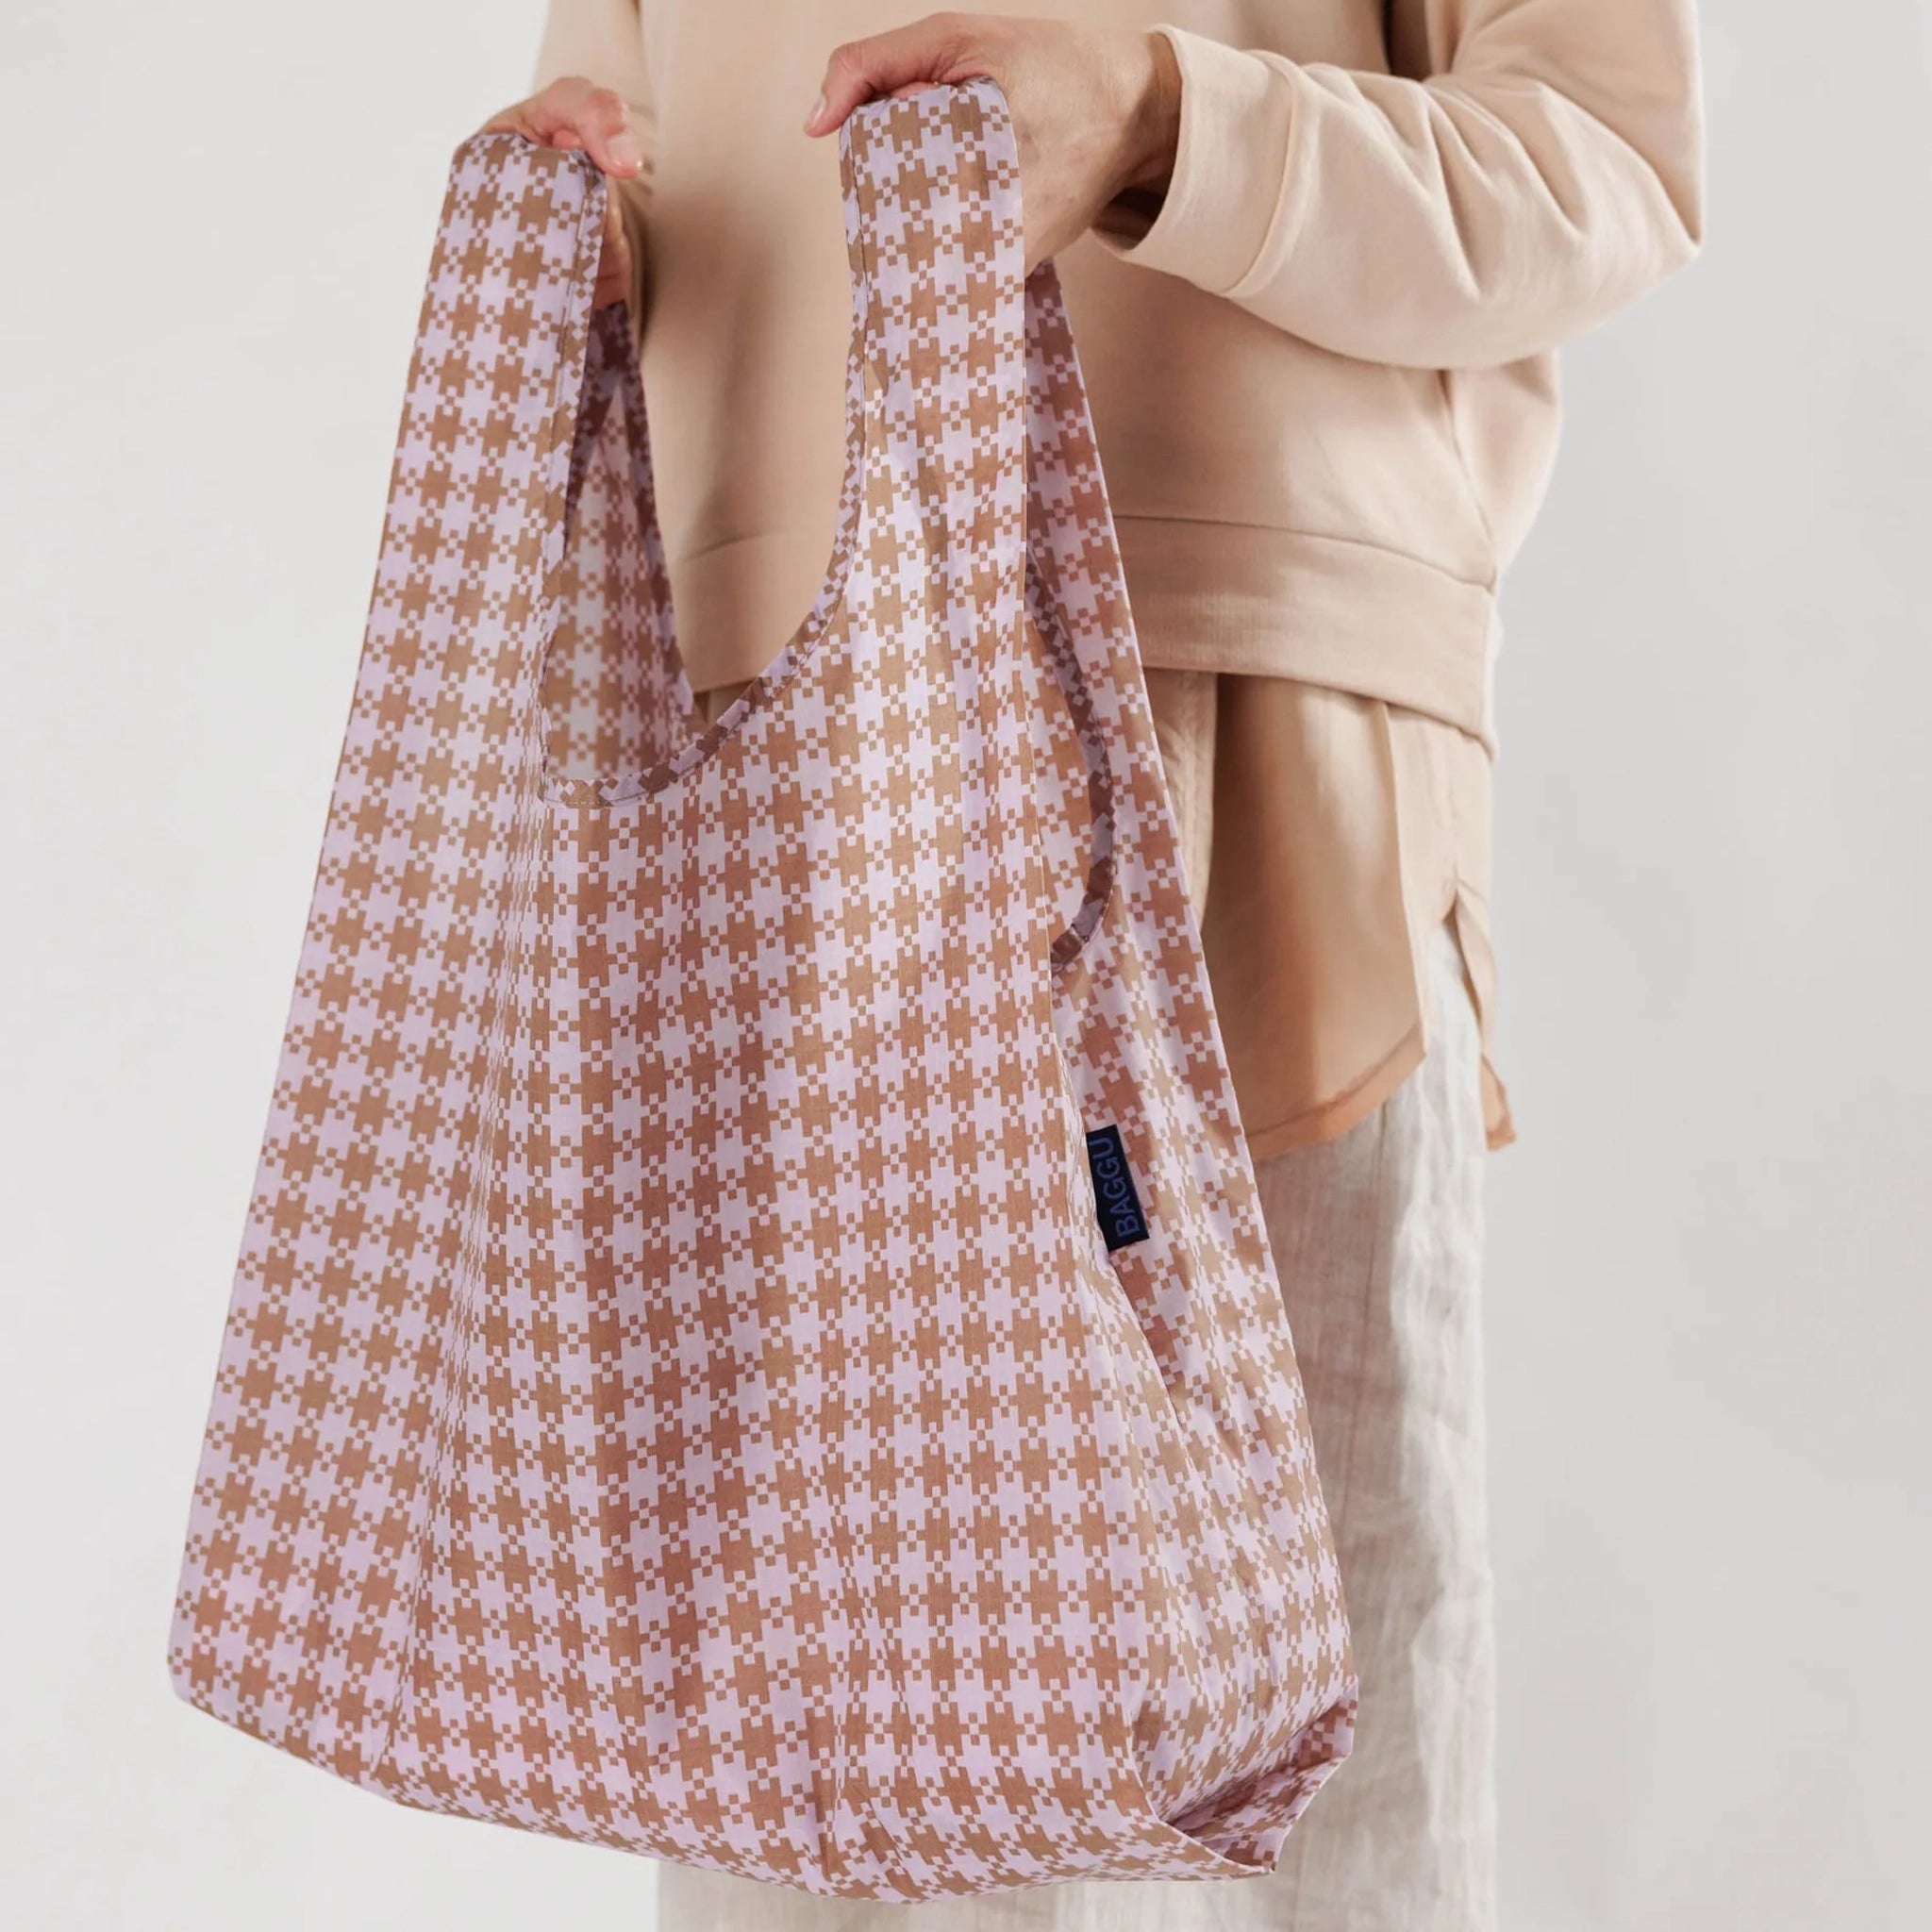 On a white background is a rose colored reusable tote with a gingham print all over.